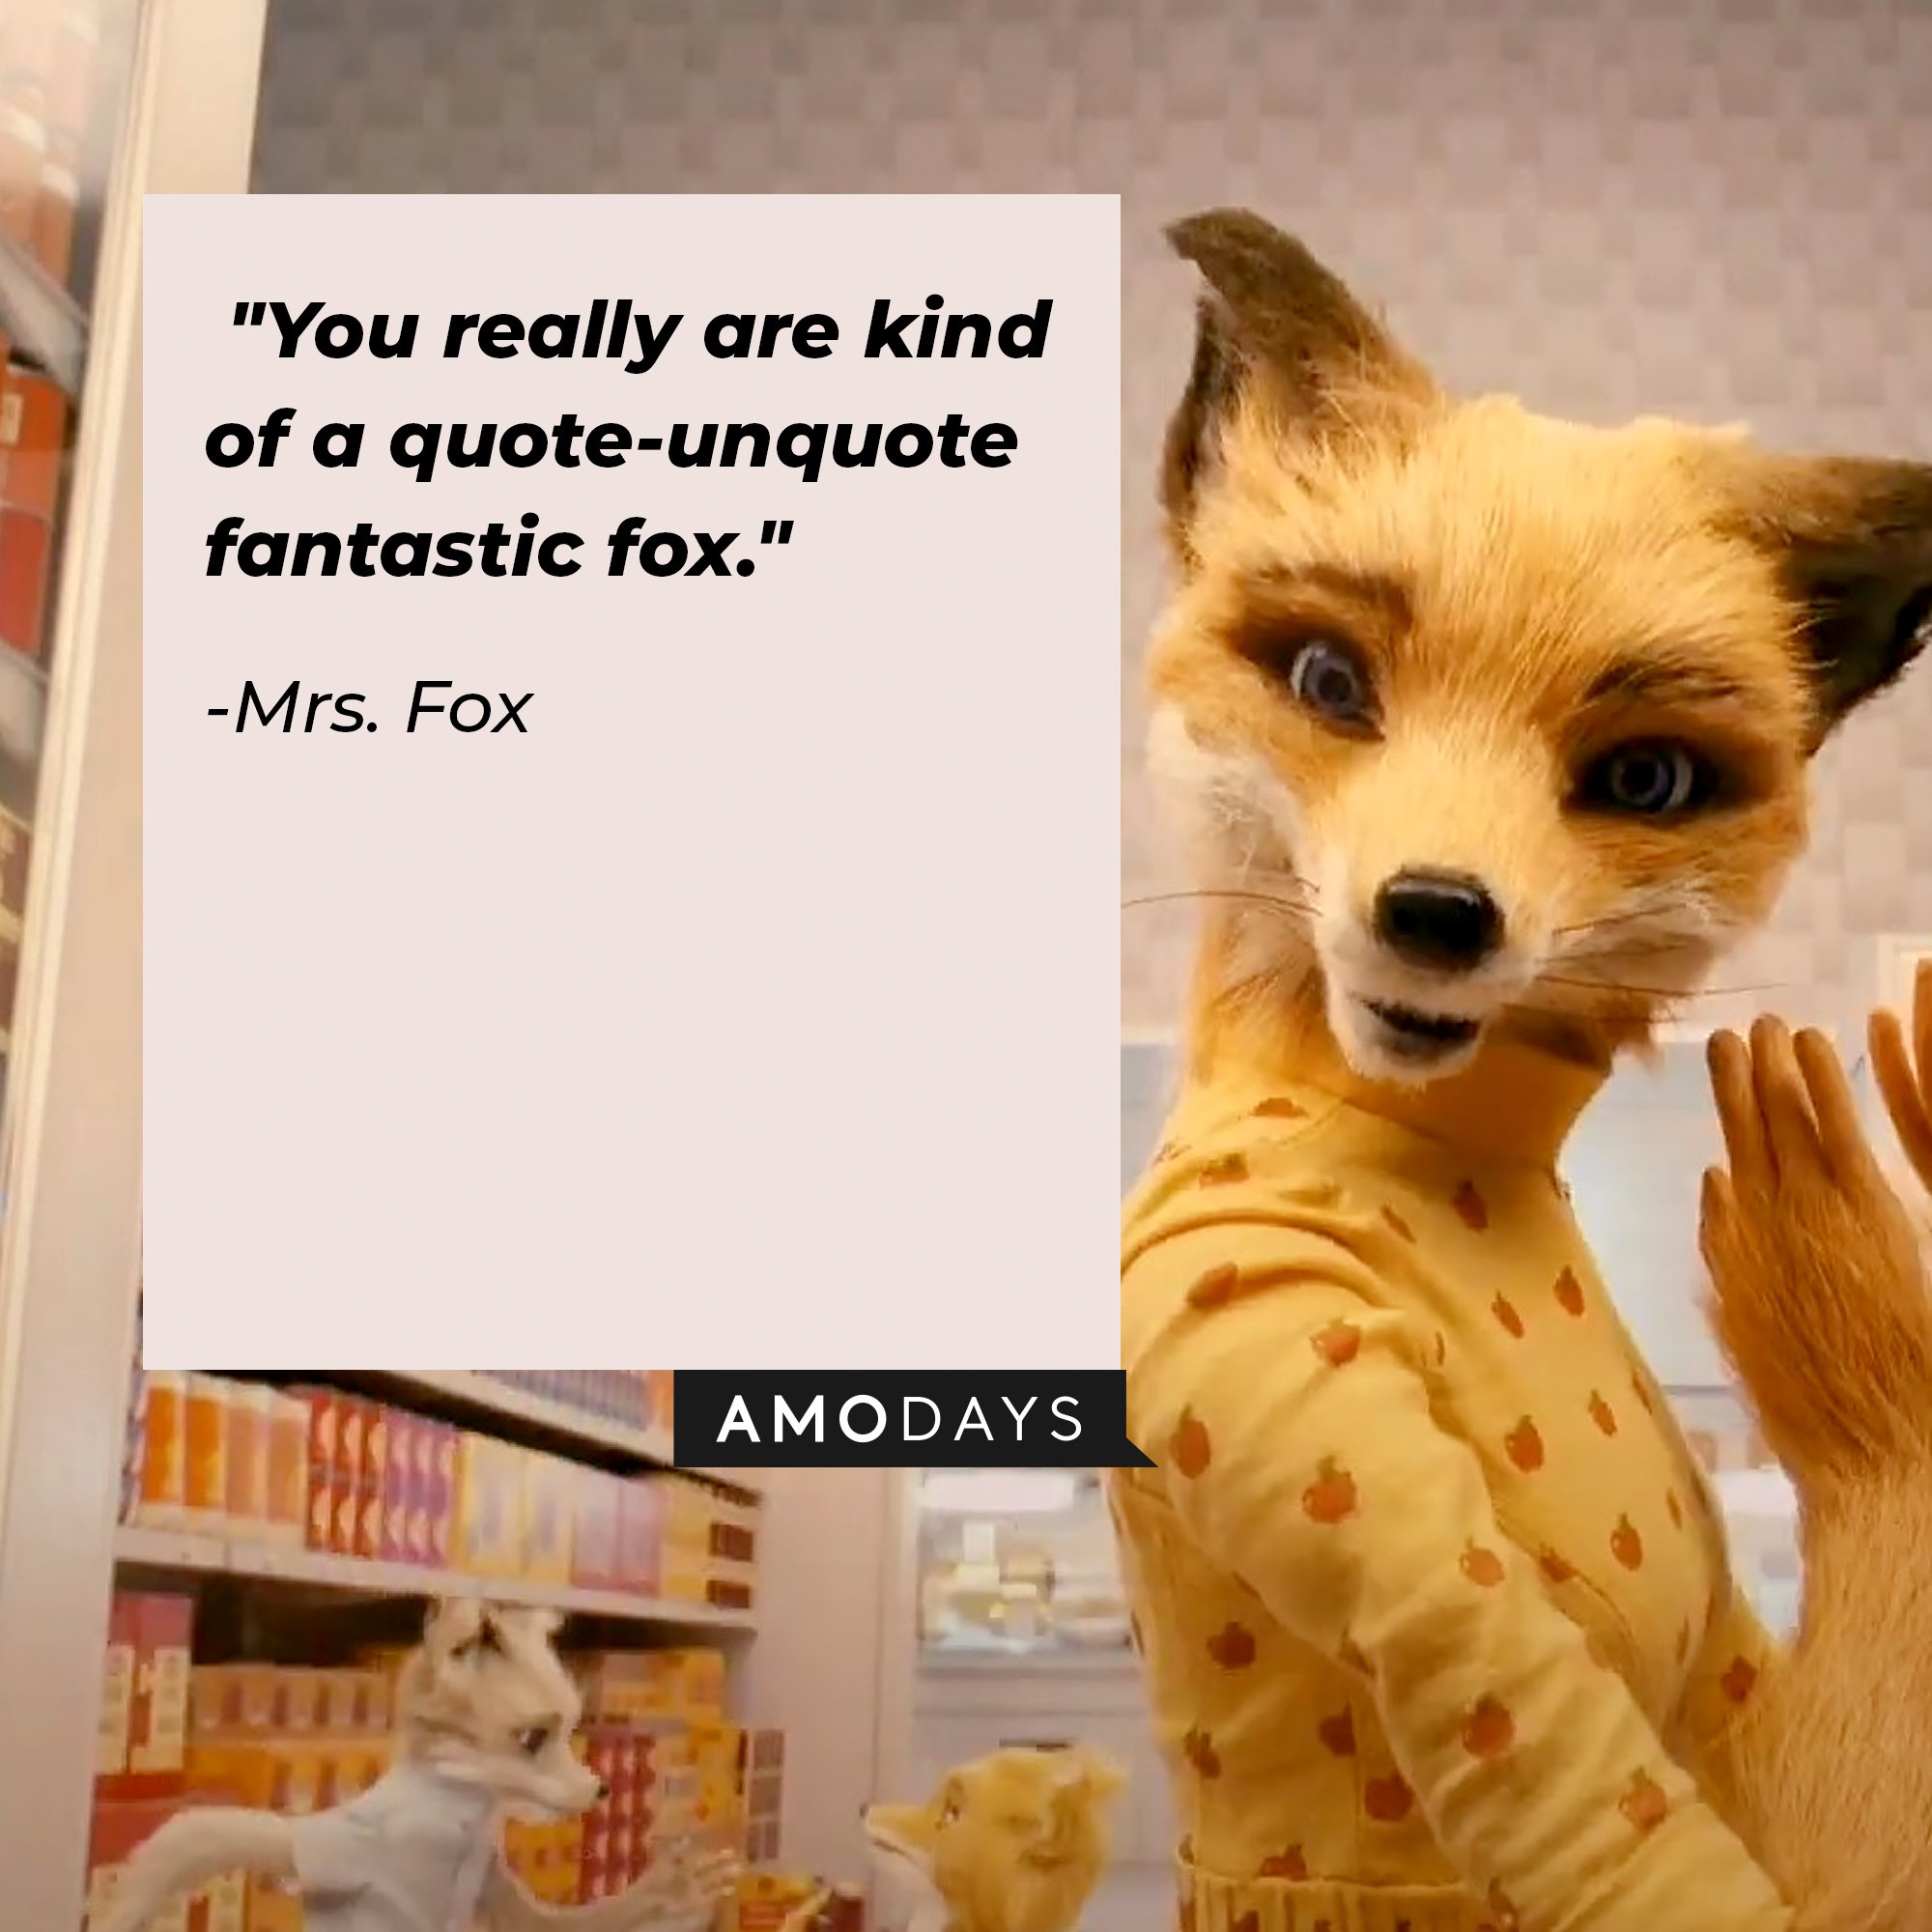  Mr’s Fox’s Quote: "You really are kind of a quote-unquote fantastic fox." | Image: AmoDays